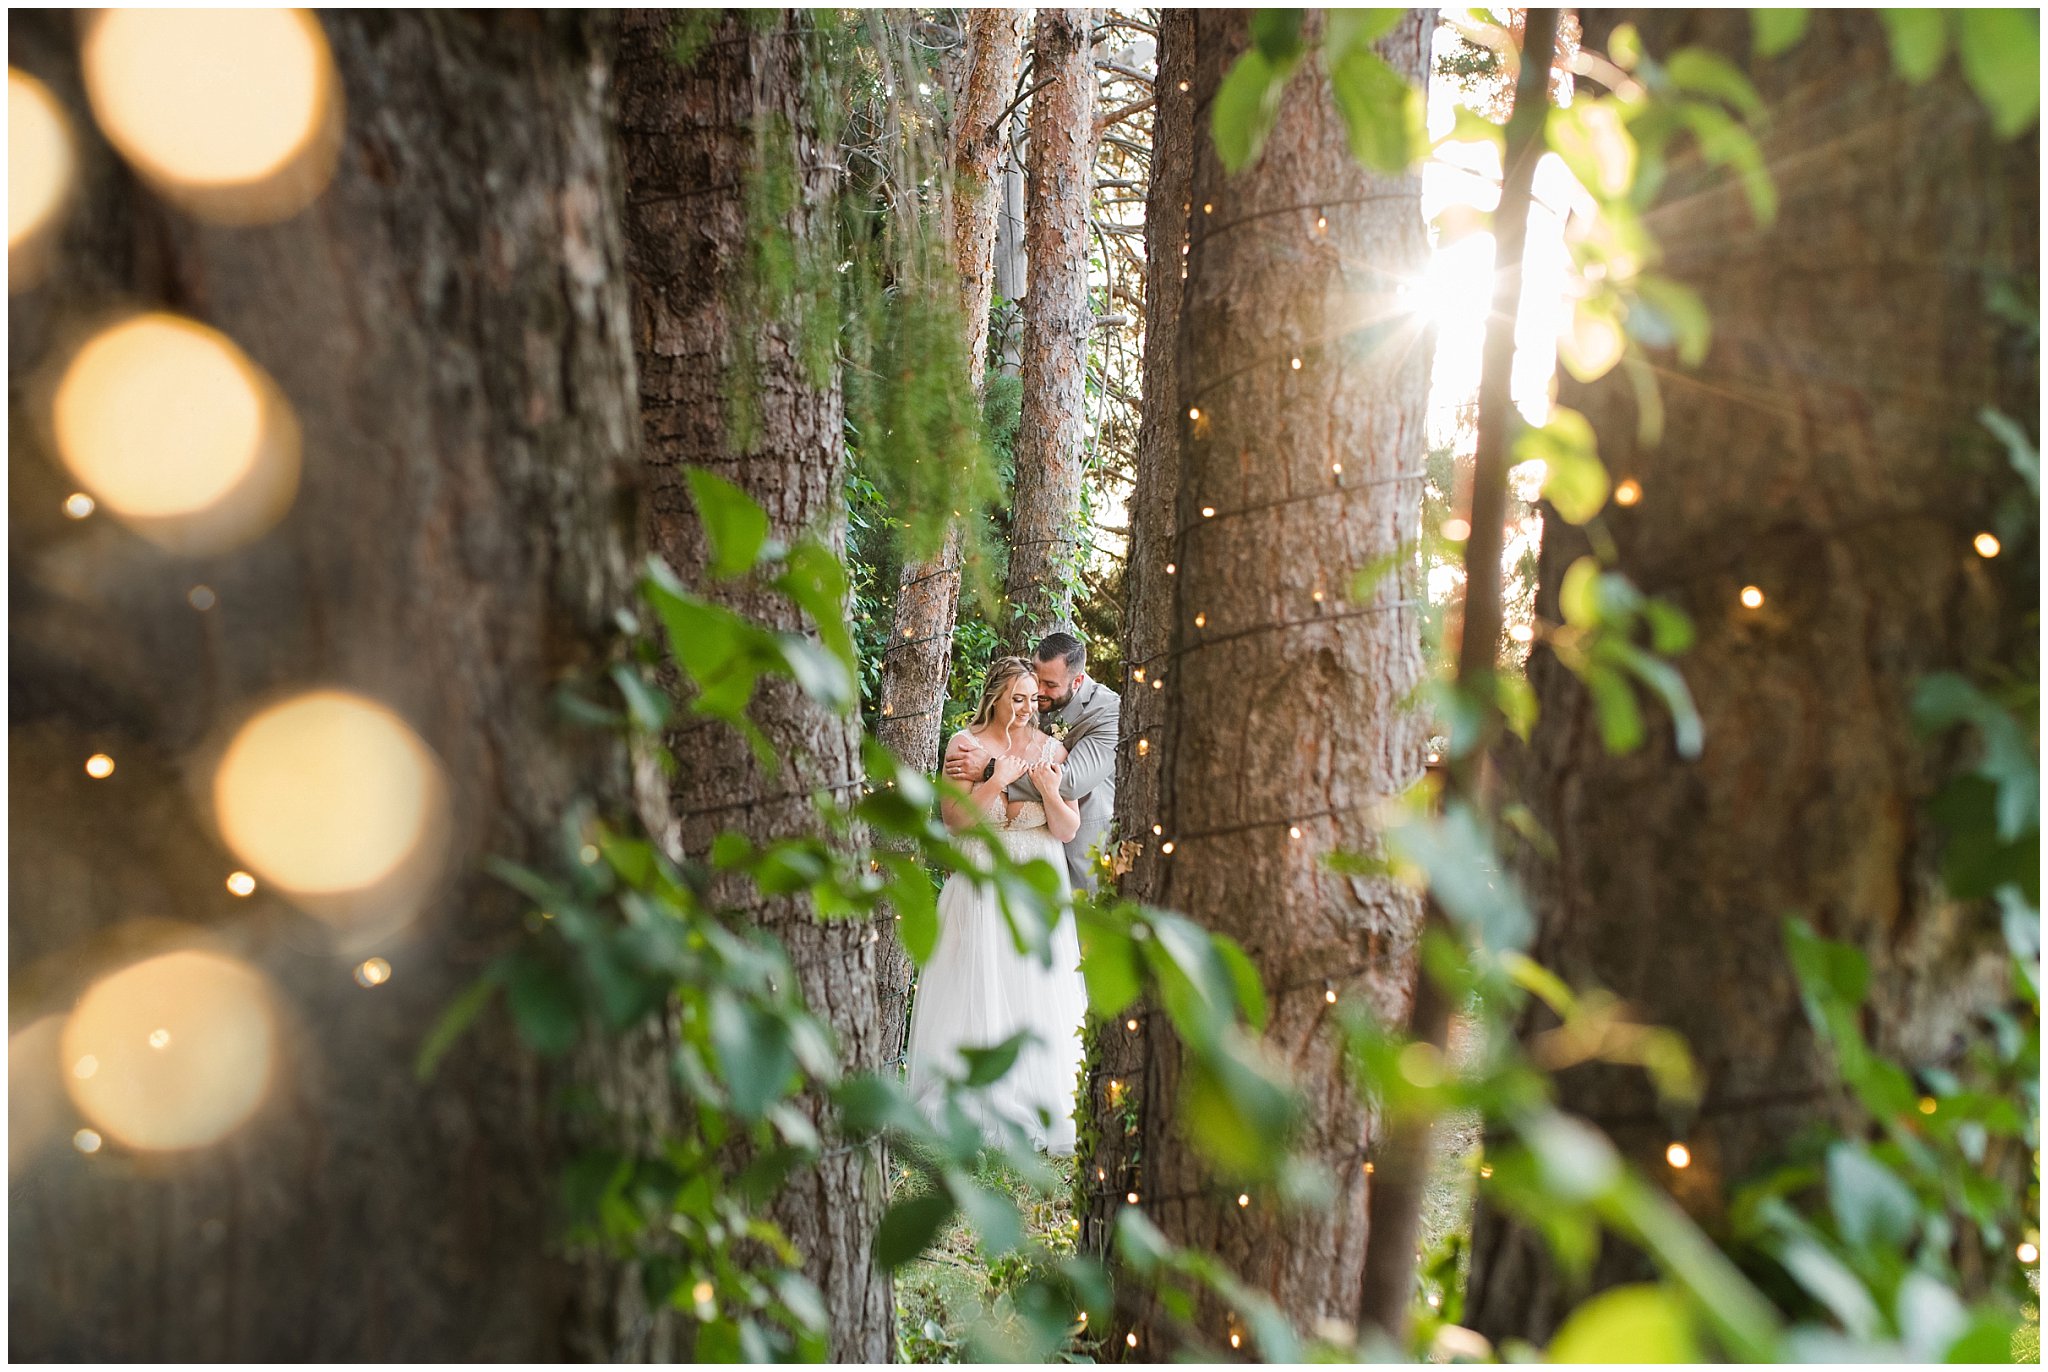 Bride and groom portraits with gray suit and champagne dress and veil and white floral bouquet in pine trees | Sage Green and Gray Summer Wedding at Oak Hills | Jessie and Dallin Photography